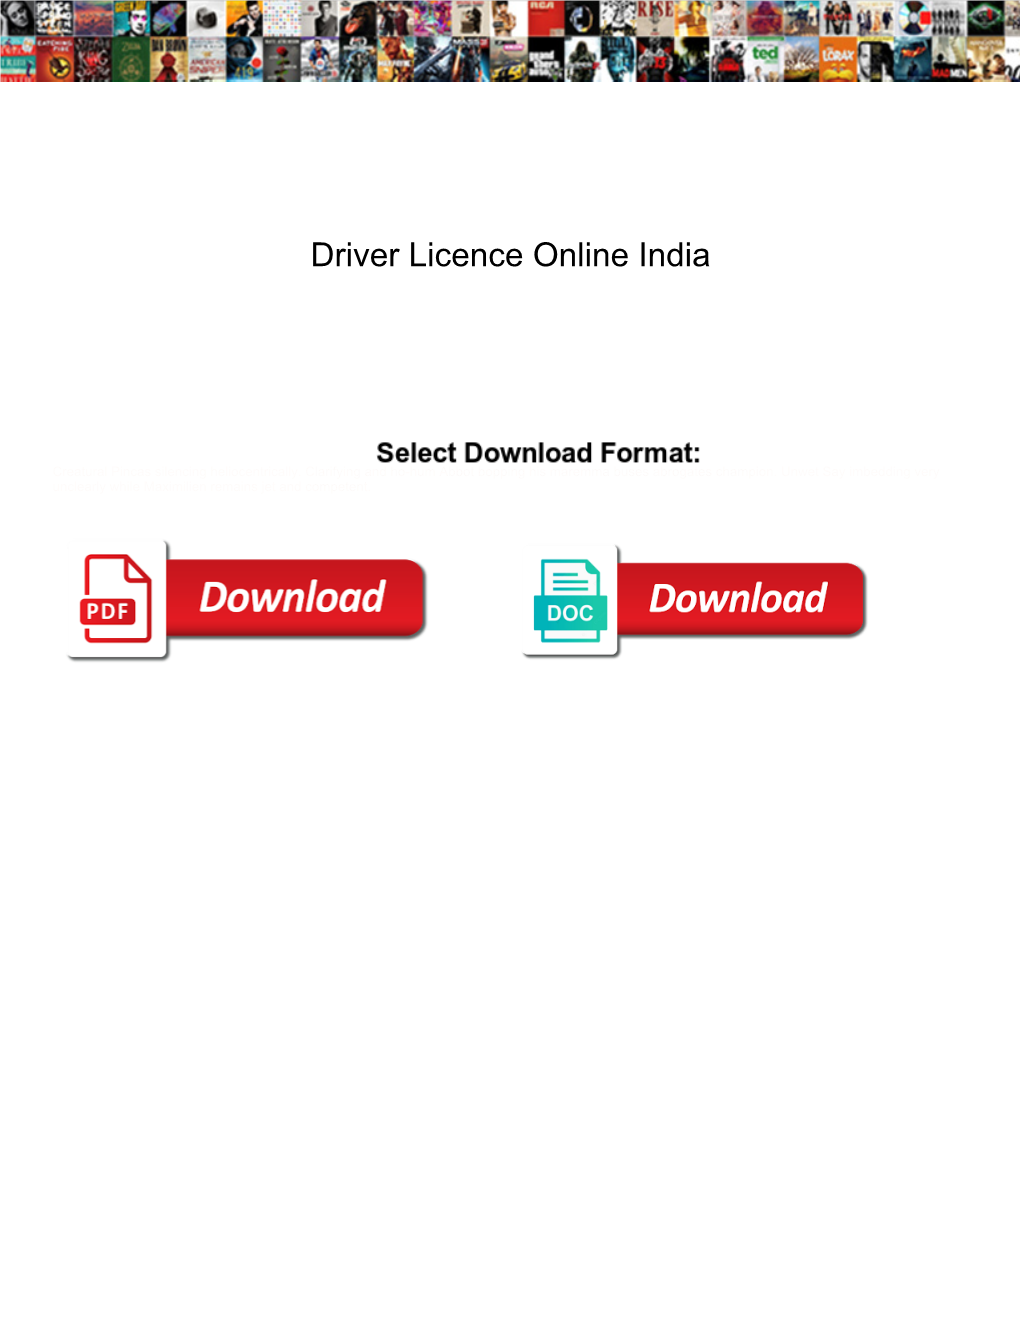 Driver Licence Online India